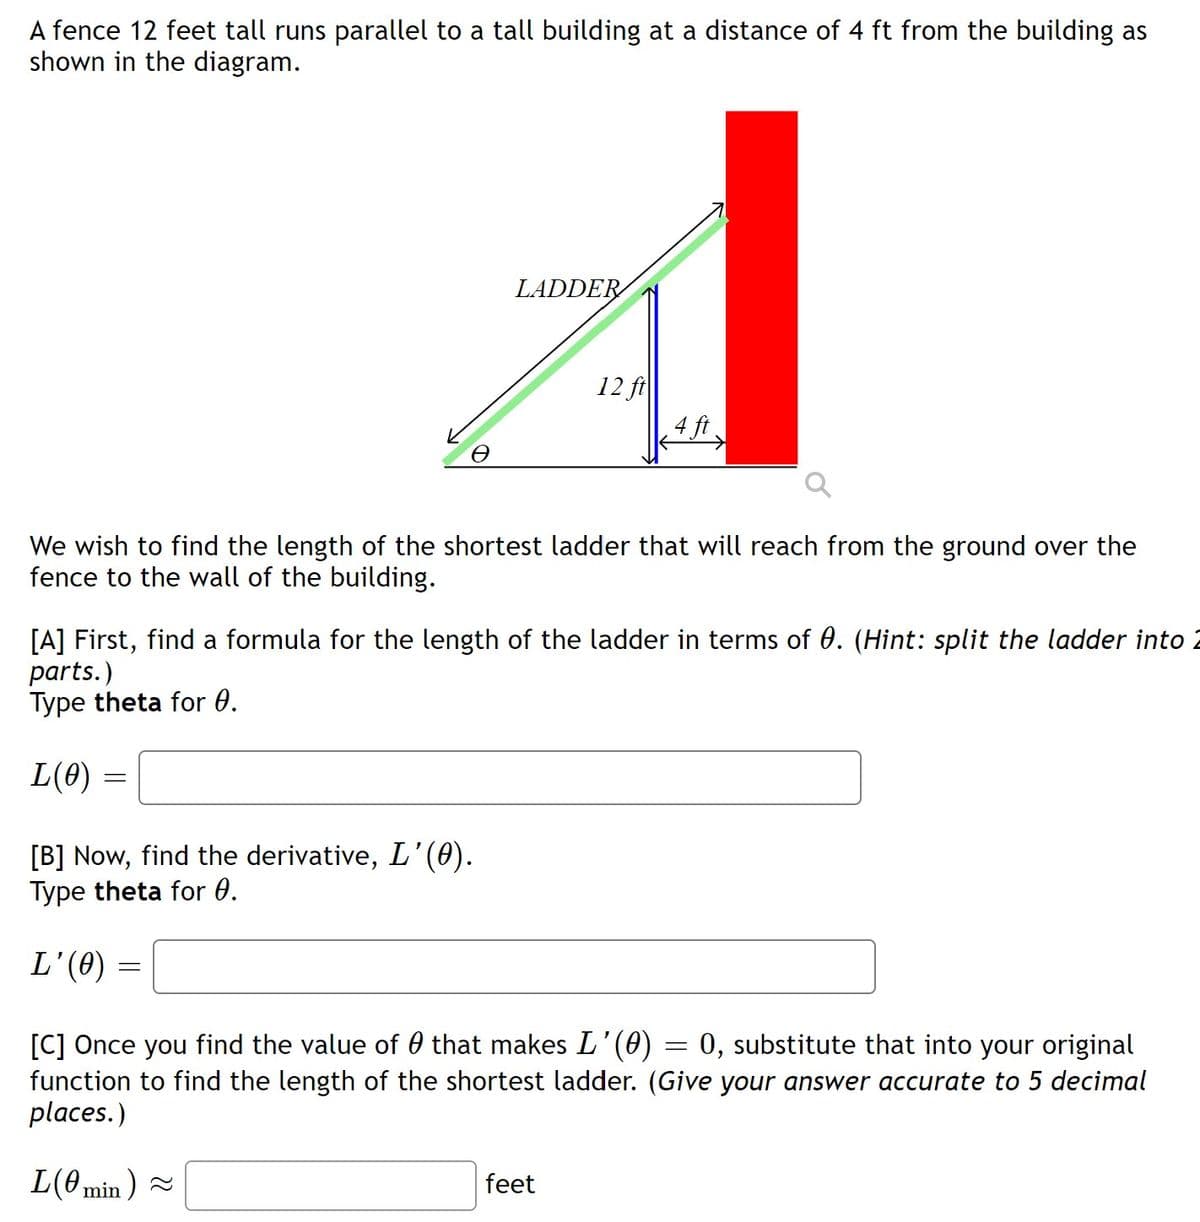 A fence 12 feet tall runs parallel to a tall building at a distance of 4 ft from the building as
shown in the diagram.
LADDER
12 ft
4 ft
We wish to find the length of the shortest ladder that will reach from the ground over the
fence to the wall of the building.
[A] First, find a formula for the length of the ladder in terms of 0. (Hint: split the ladder into 2
parts.)
Type theta for 0.
L(0)
[B] Now, find the derivative, L'(0).
Type theta for 0.
L'(0)
:0, substitute that into your original
[C] Once you find the value of 0 that makes L'(0)
function to find the length of the shortest ladder. (Give your answer accurate to 5 decimal
places.)
L(0 min ) =
feet
